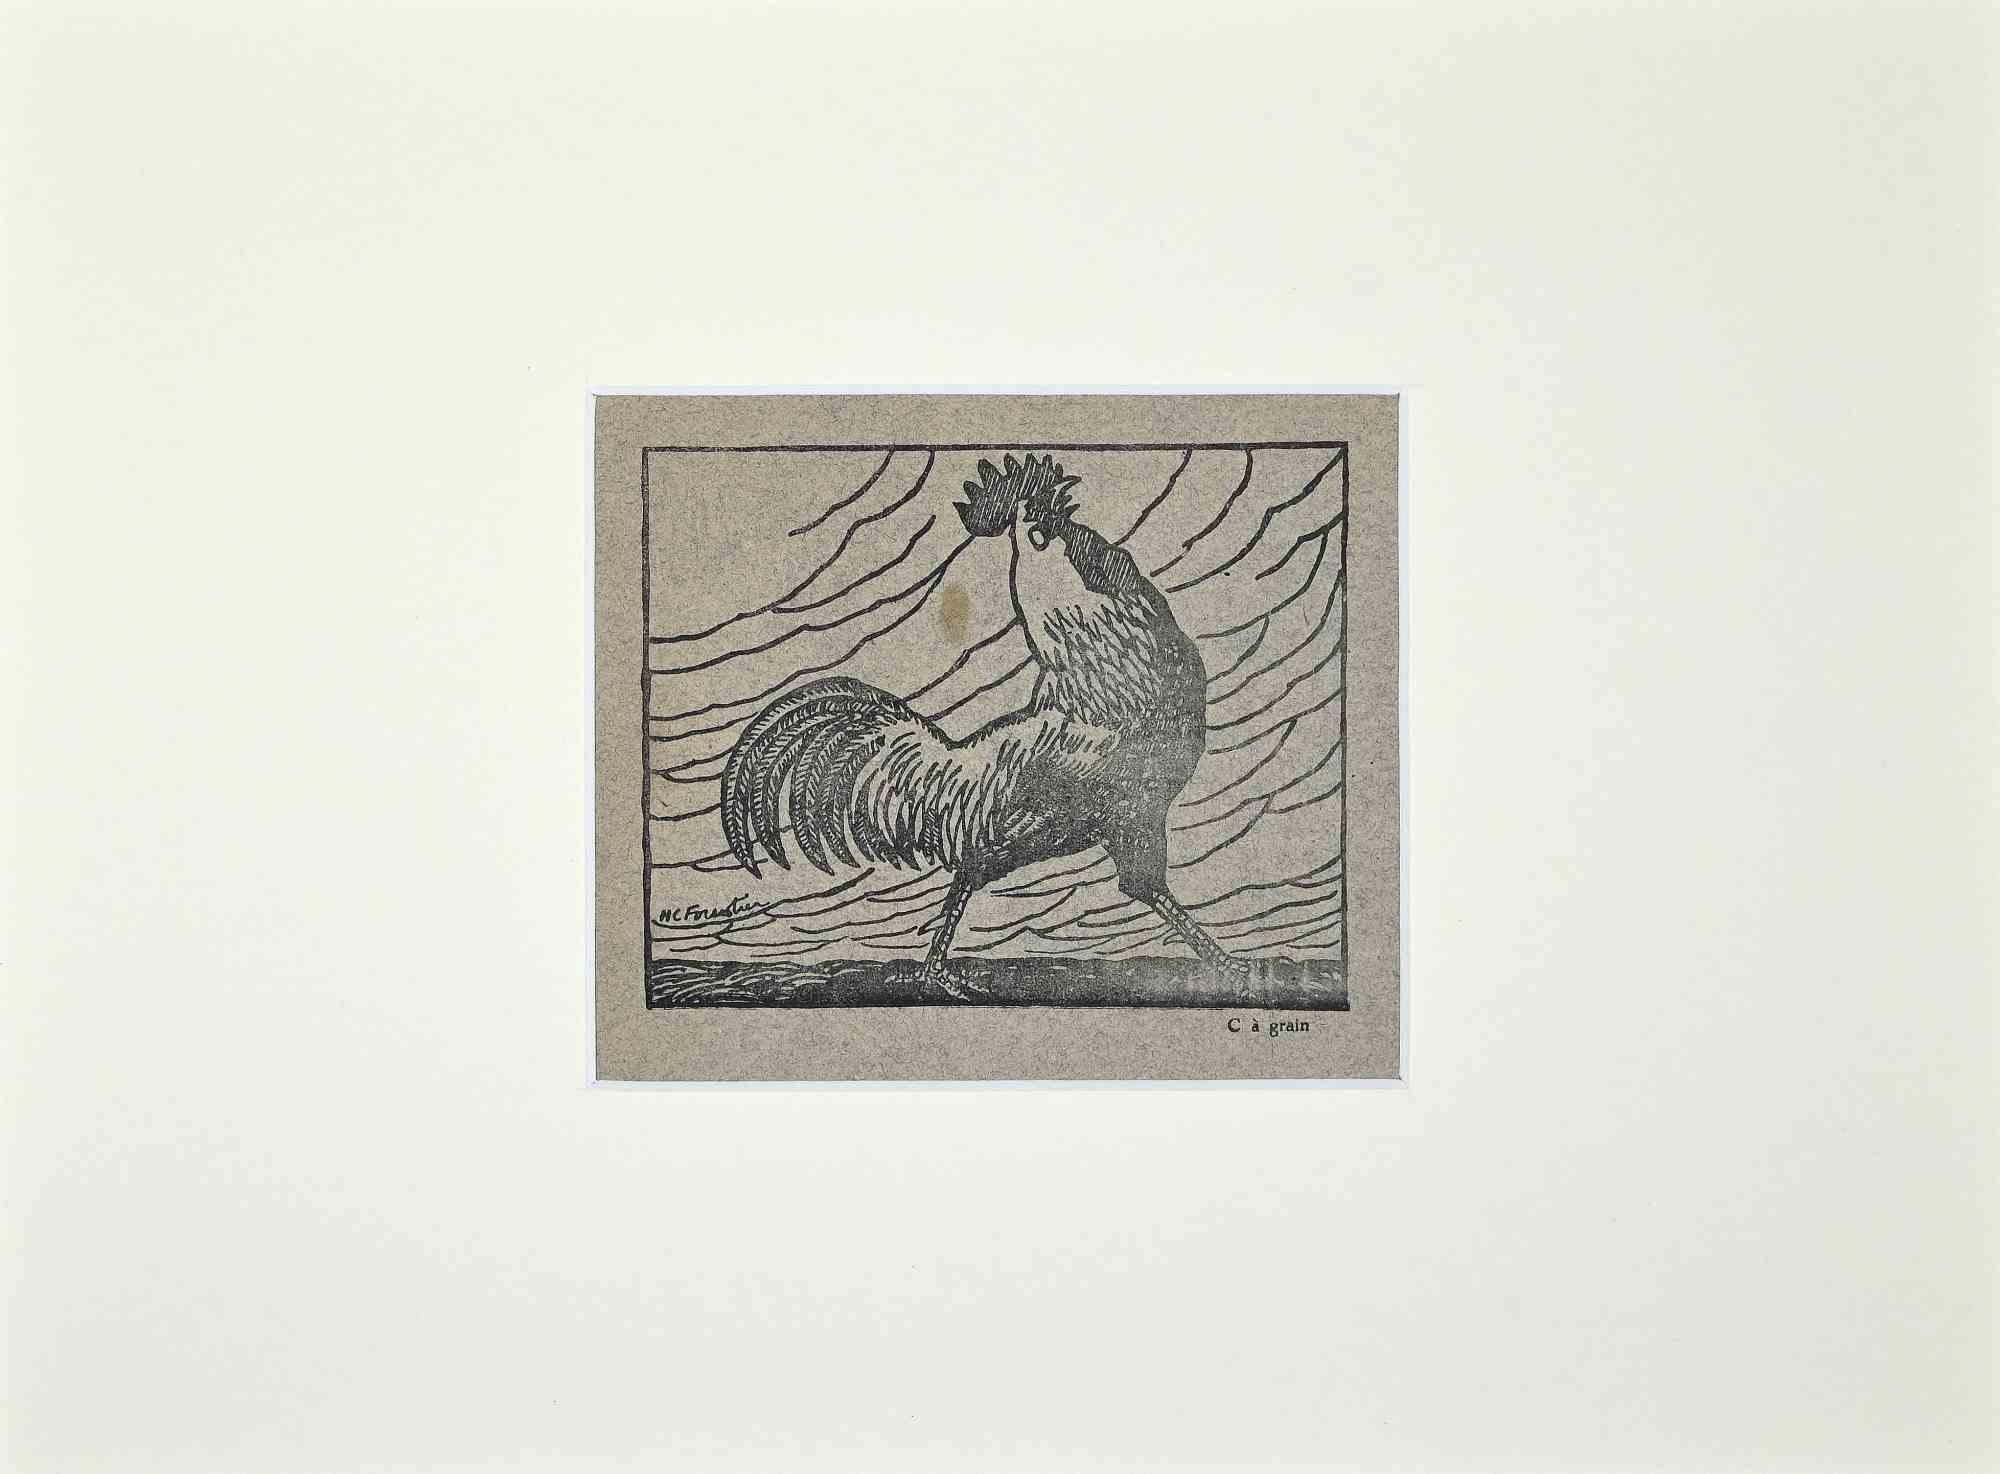 Unknown Figurative Print - The Rooster - Original Woodcut Print  - 20th century